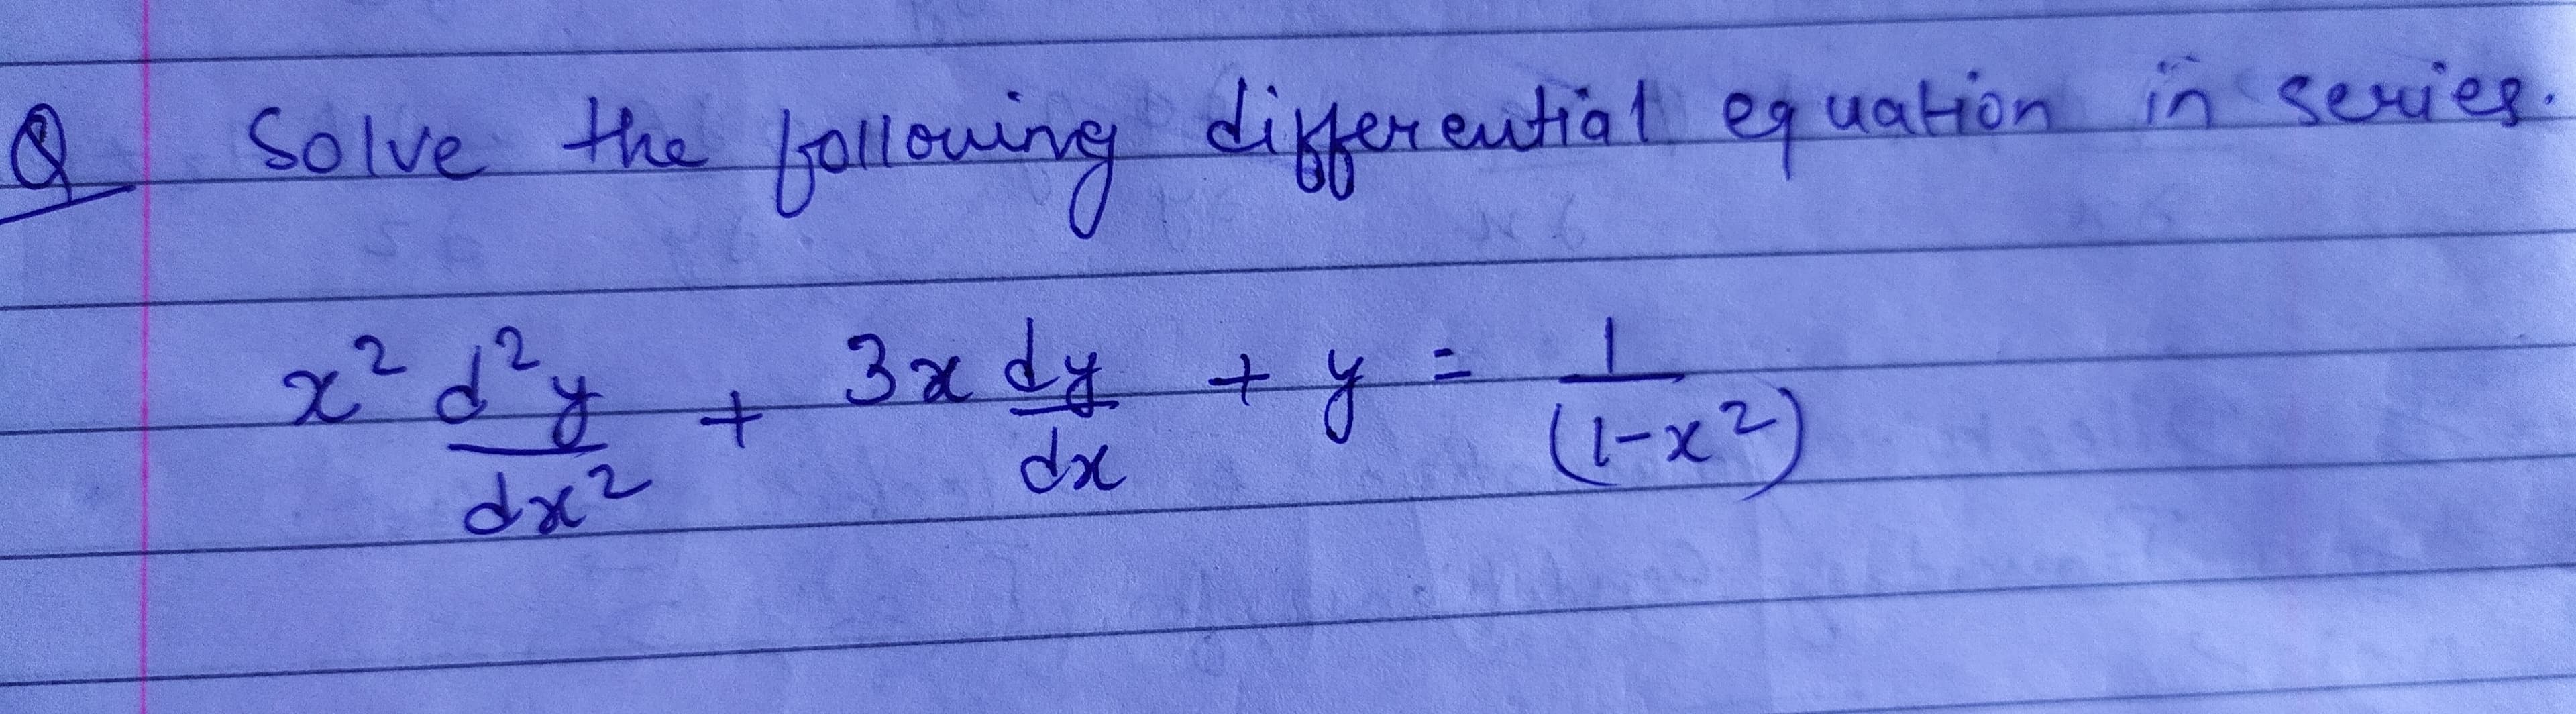 Solve the
differentiat equation in series.
suir
2.
3xdy+y
2.
dx
(1-x2)
